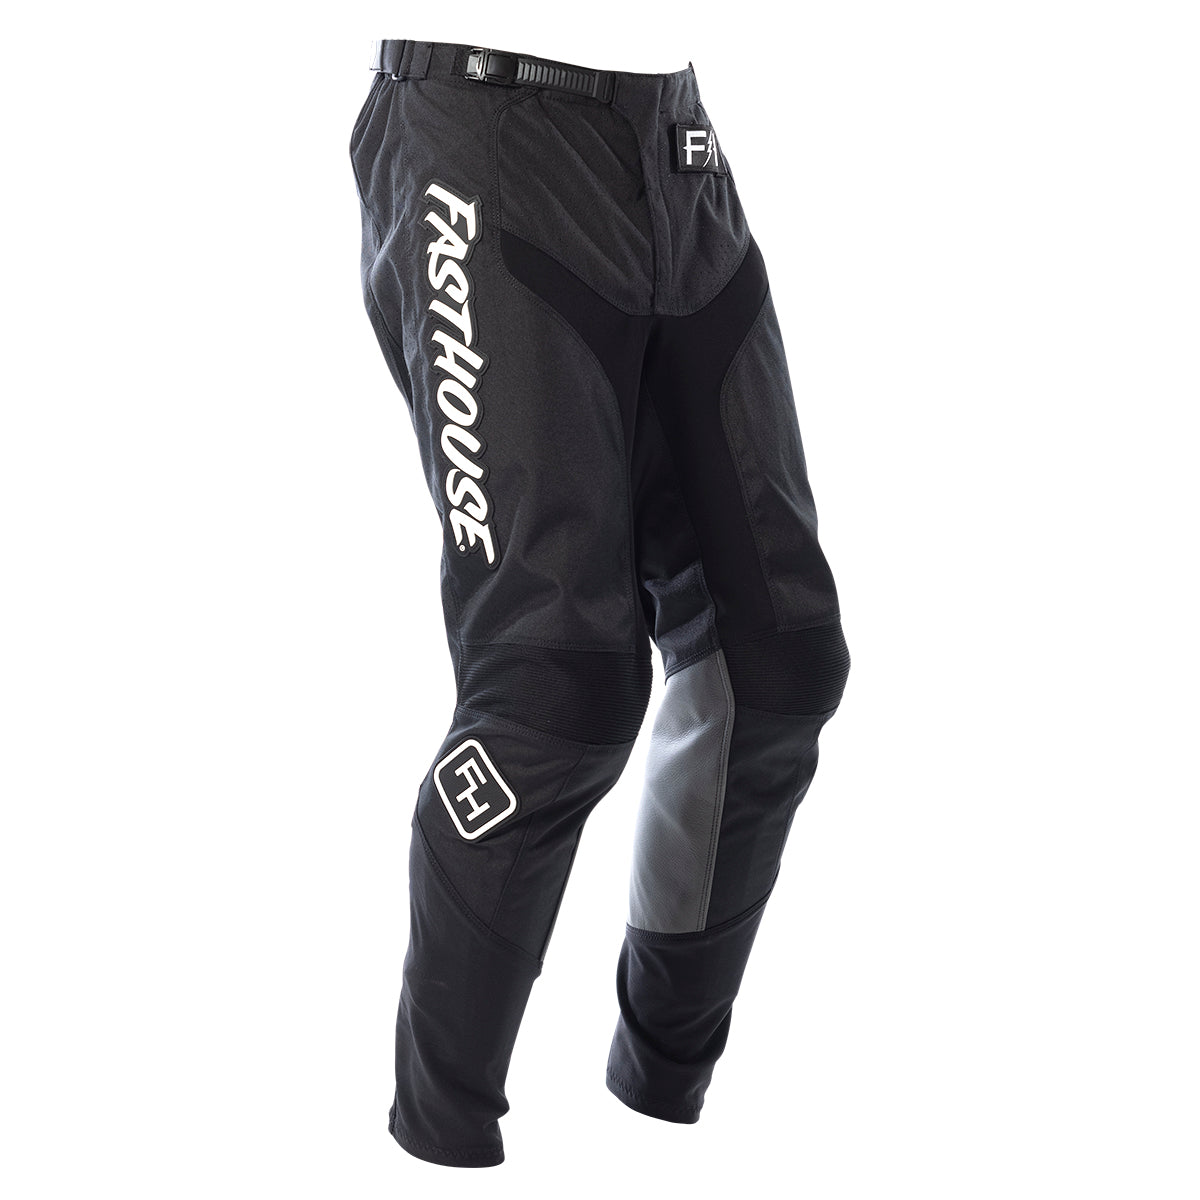 Grindhouse Pant - Black – Fasthouse